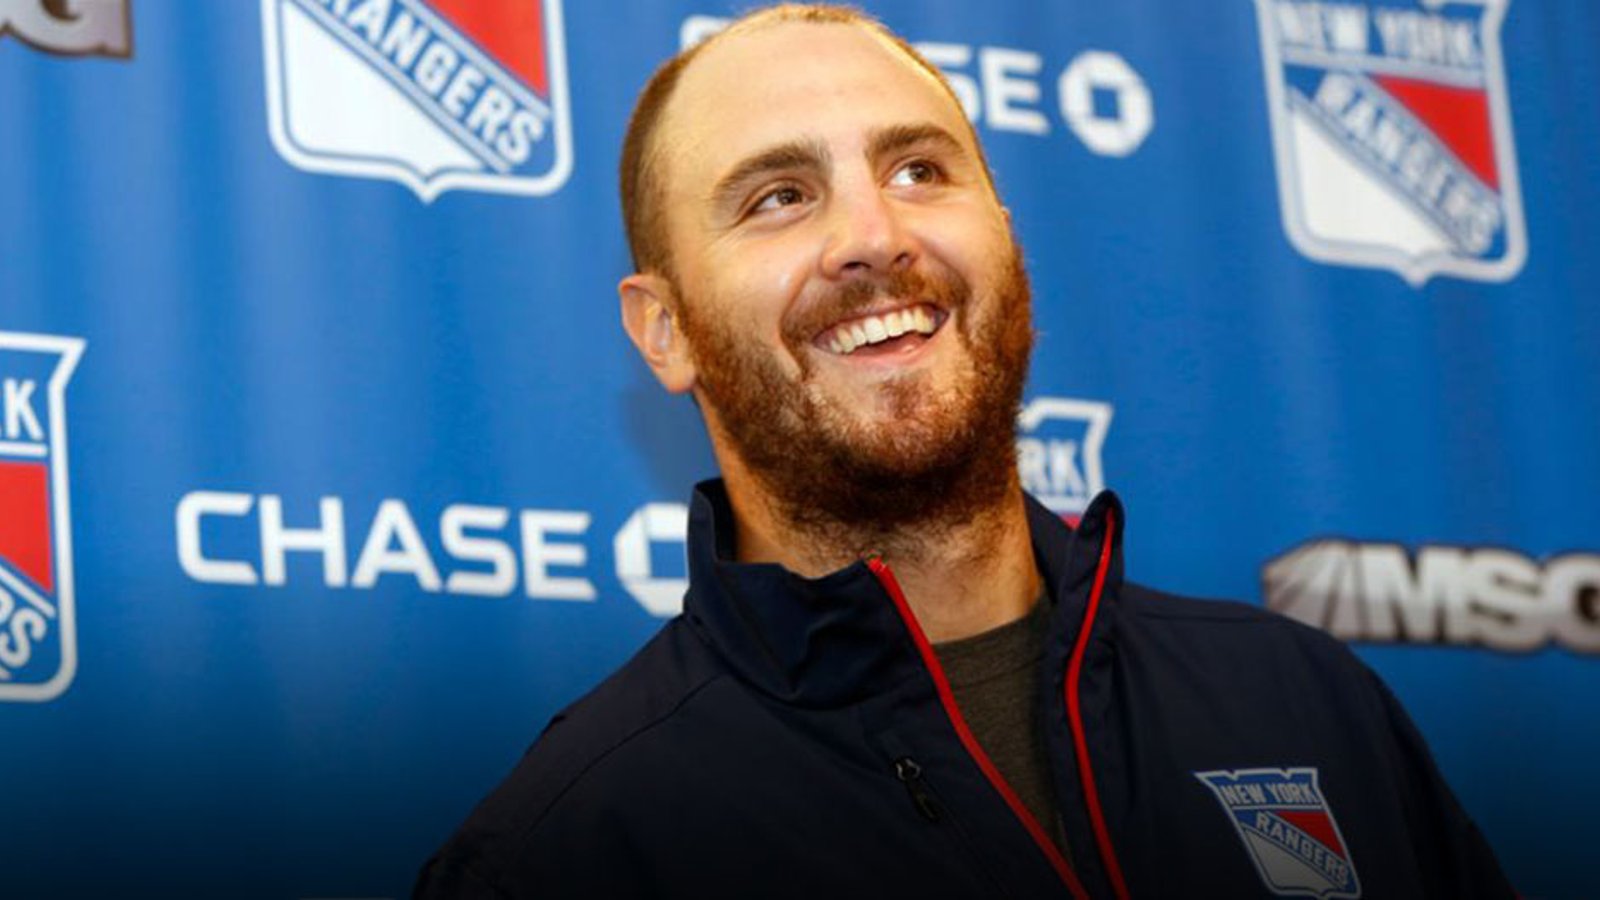 Rangers’ Shattenkirk opens up about his new team 